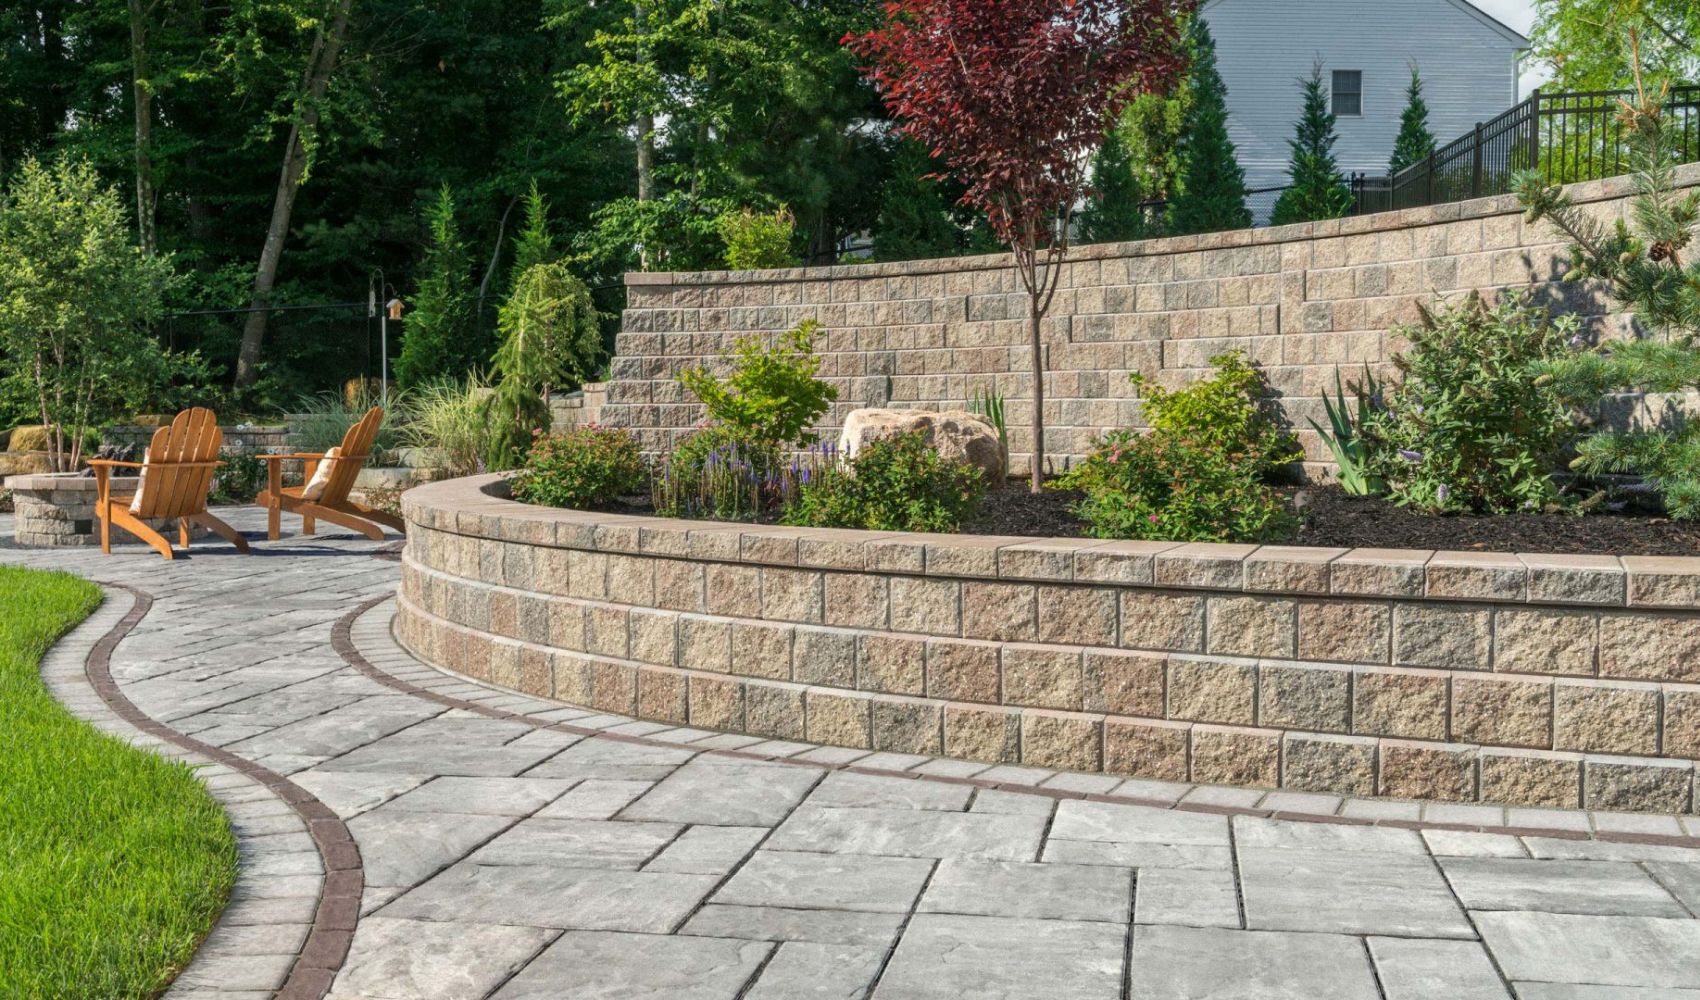 Retaining wall and paving brick landscape design